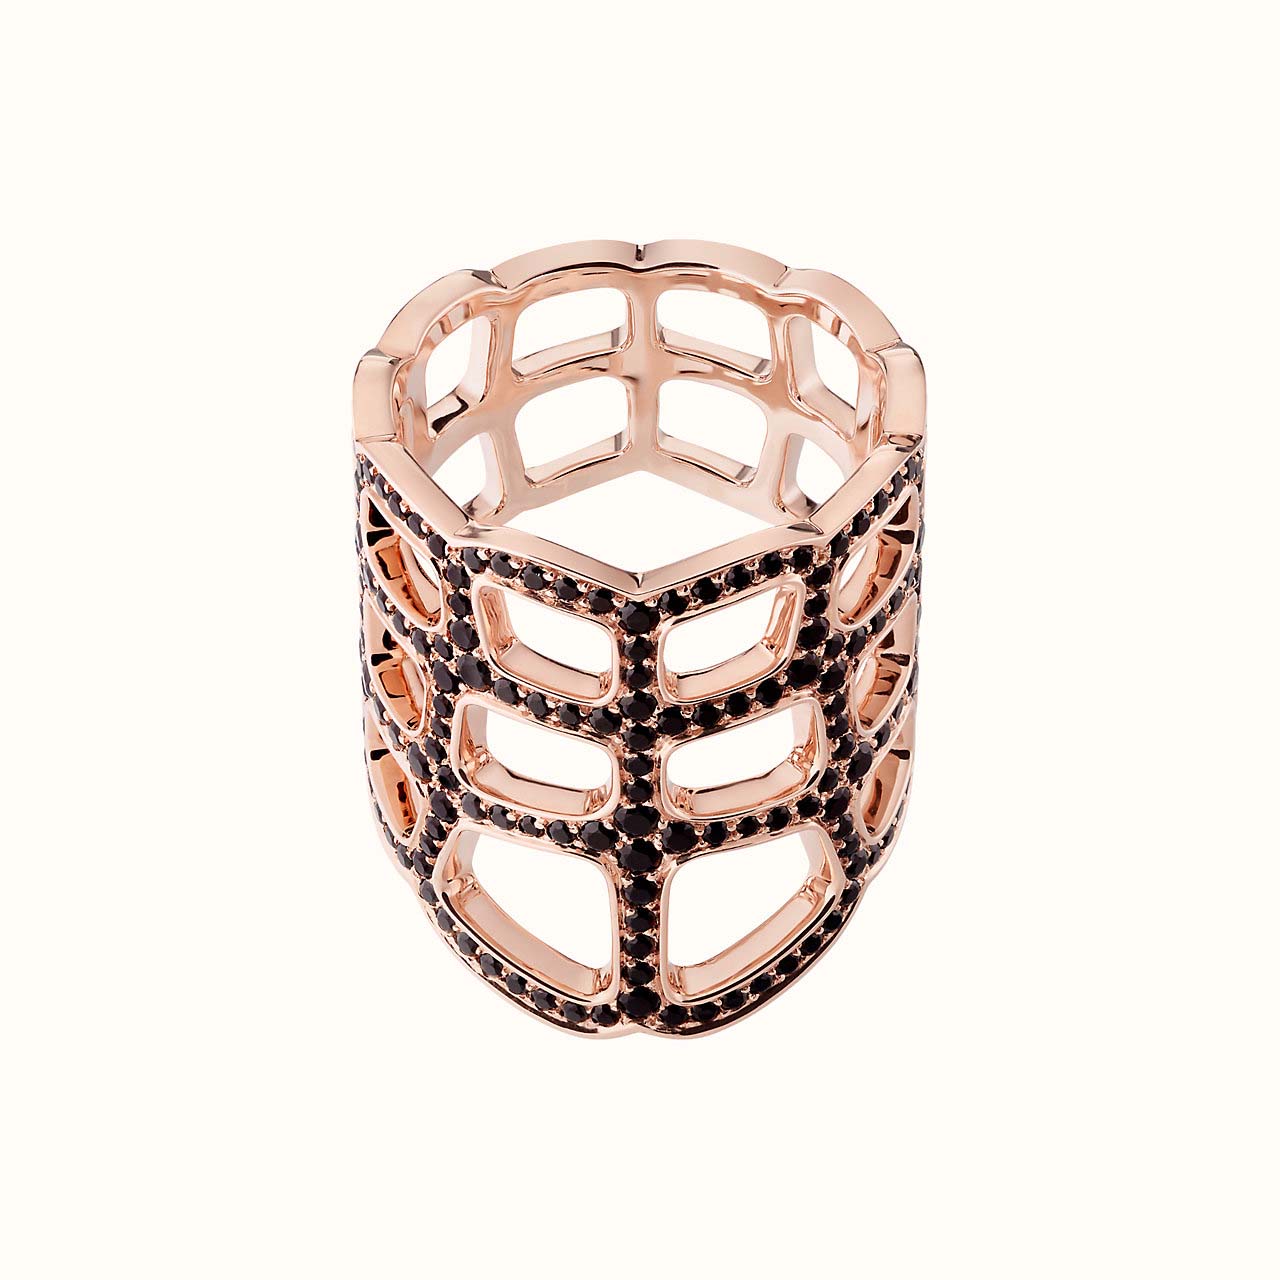 niloticus-ombre-ring--218630B 00-front-1-300-0-1280-1280_b